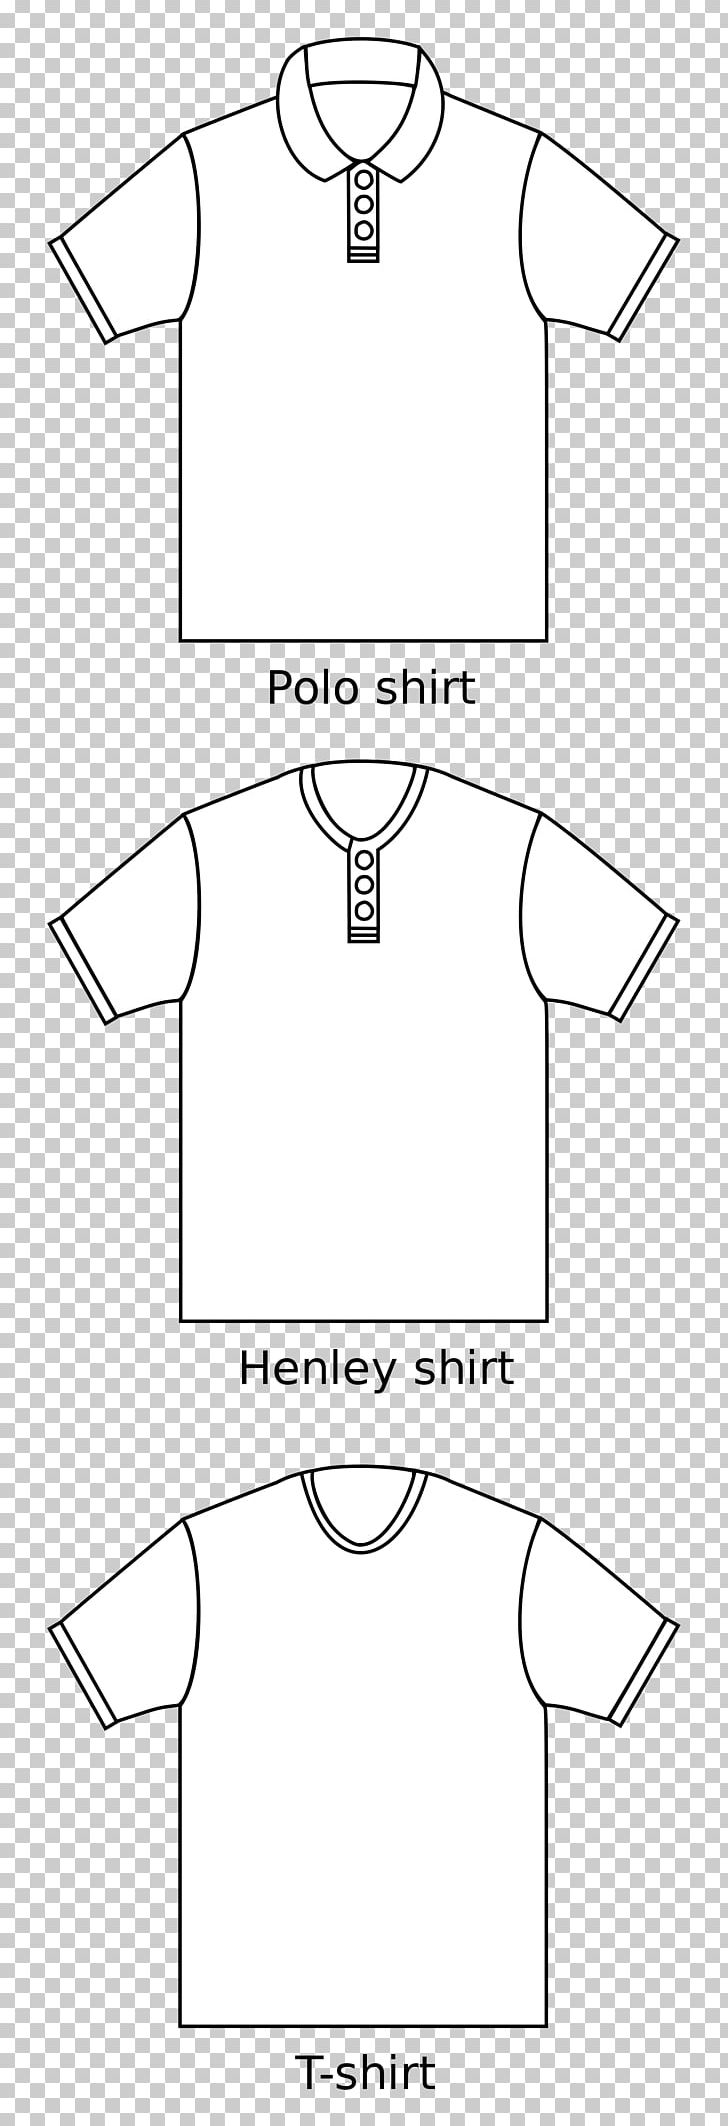 T-shirt Blouse Dress Shirt Collar PNG, Clipart, Angle, Area, Black, Black, Blouse Free PNG Download